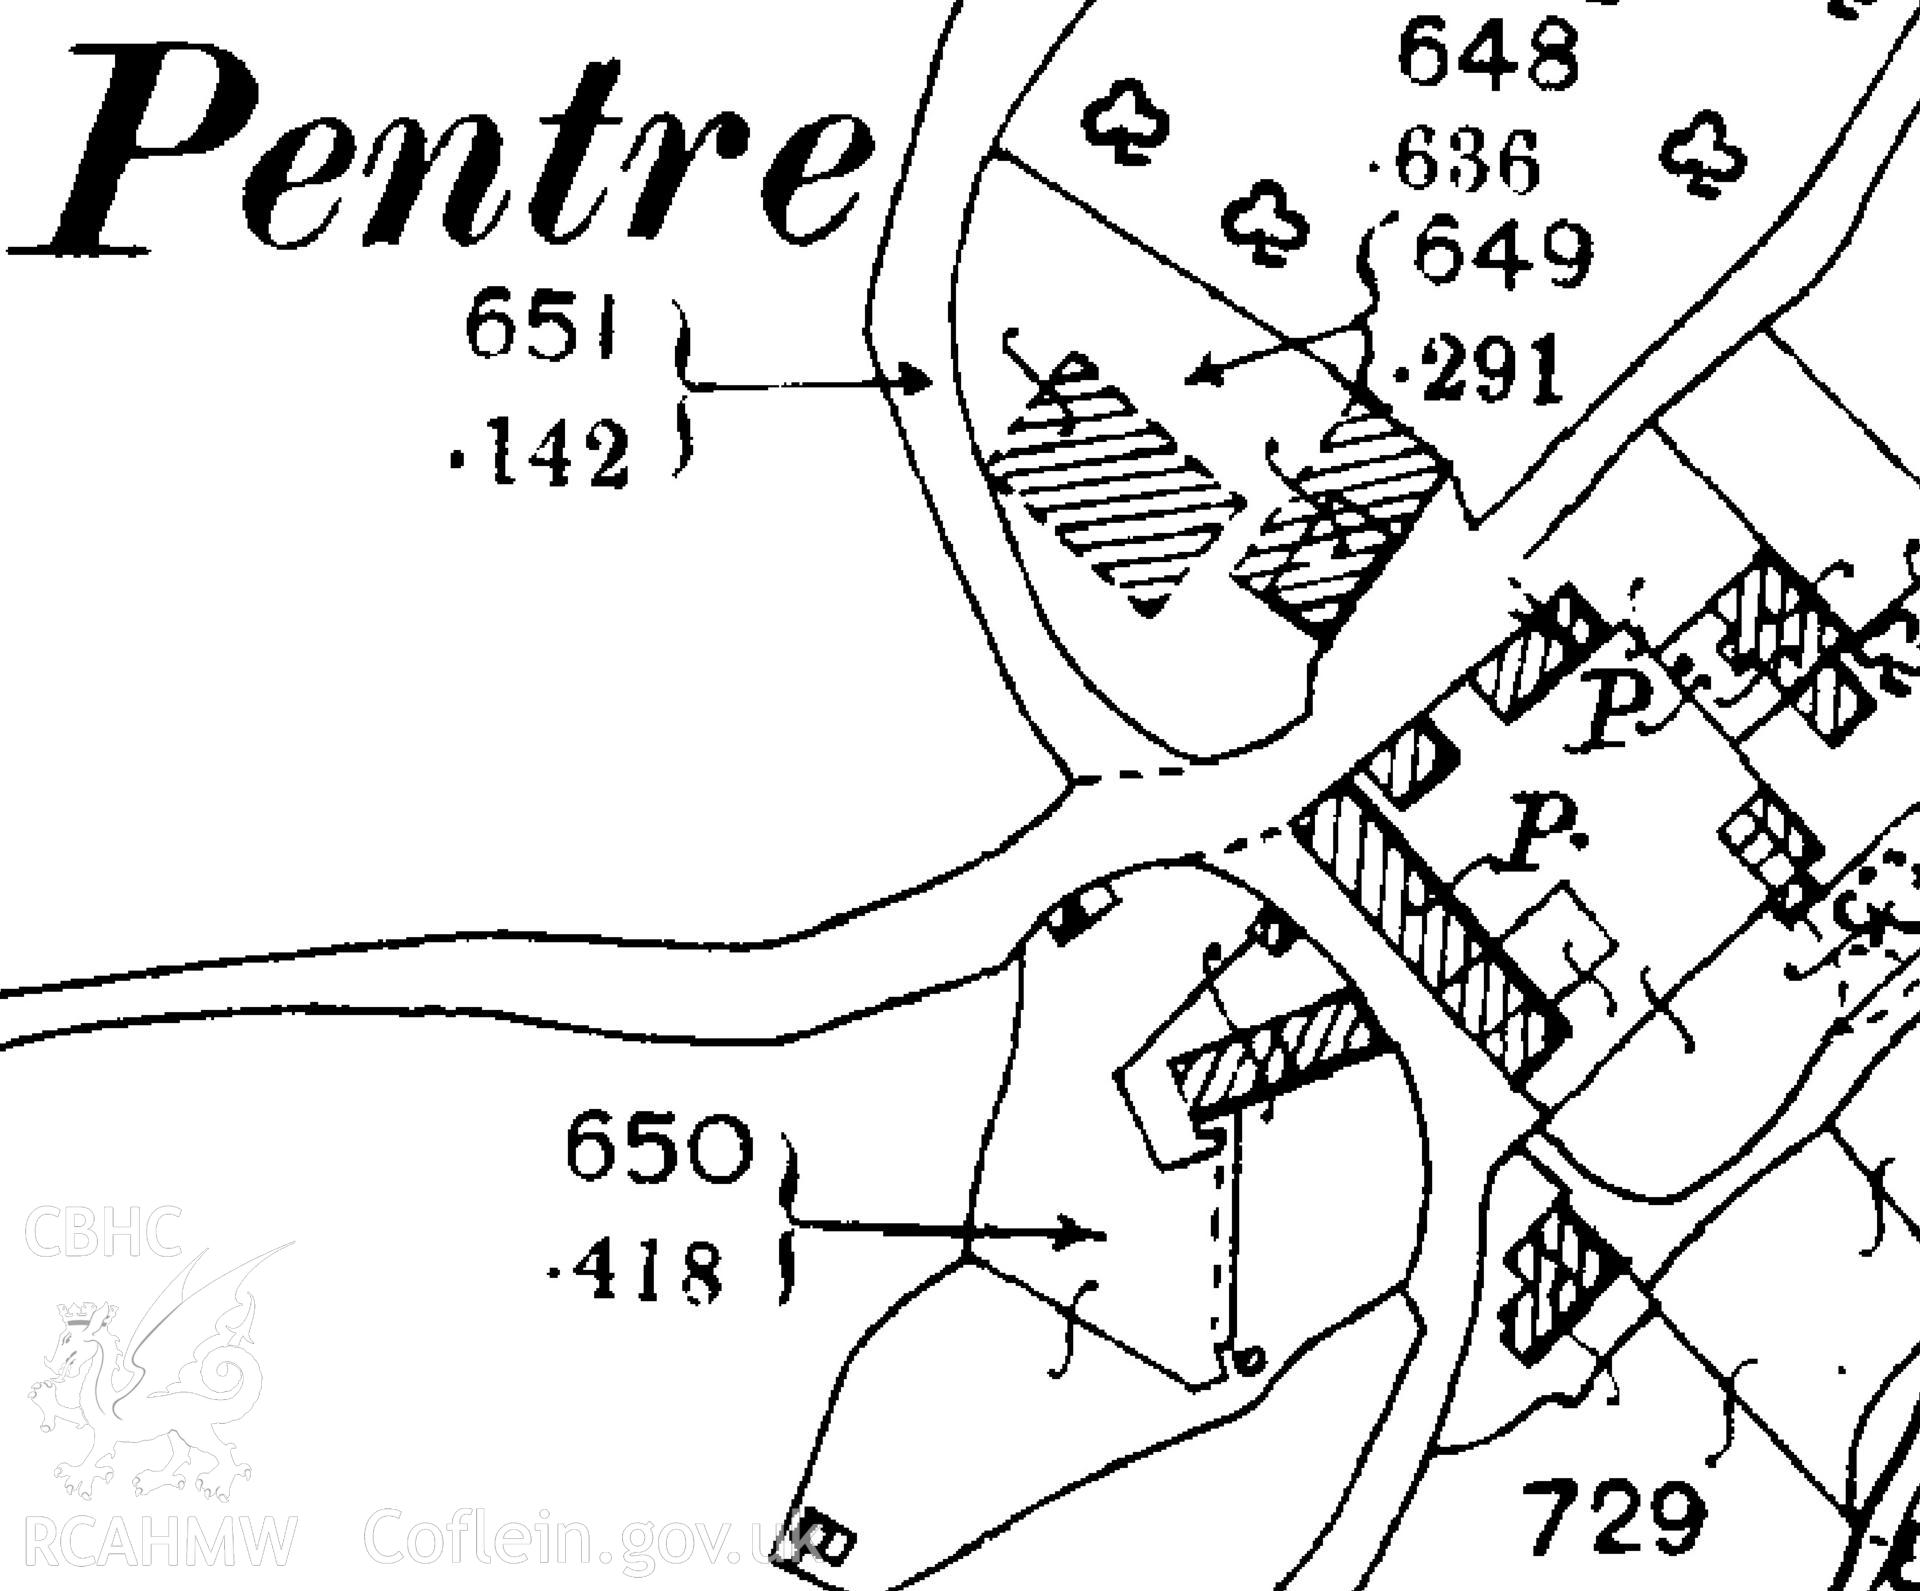 1902 Ordnance Survey map used as report illustration for CPAT Project 2414: Pentre Barns, Llandyssil, Powys - Building Survey. Prepared by Kate Pack of Clwyd Powys Archaeological Trust, 2019. Report no. 1694.